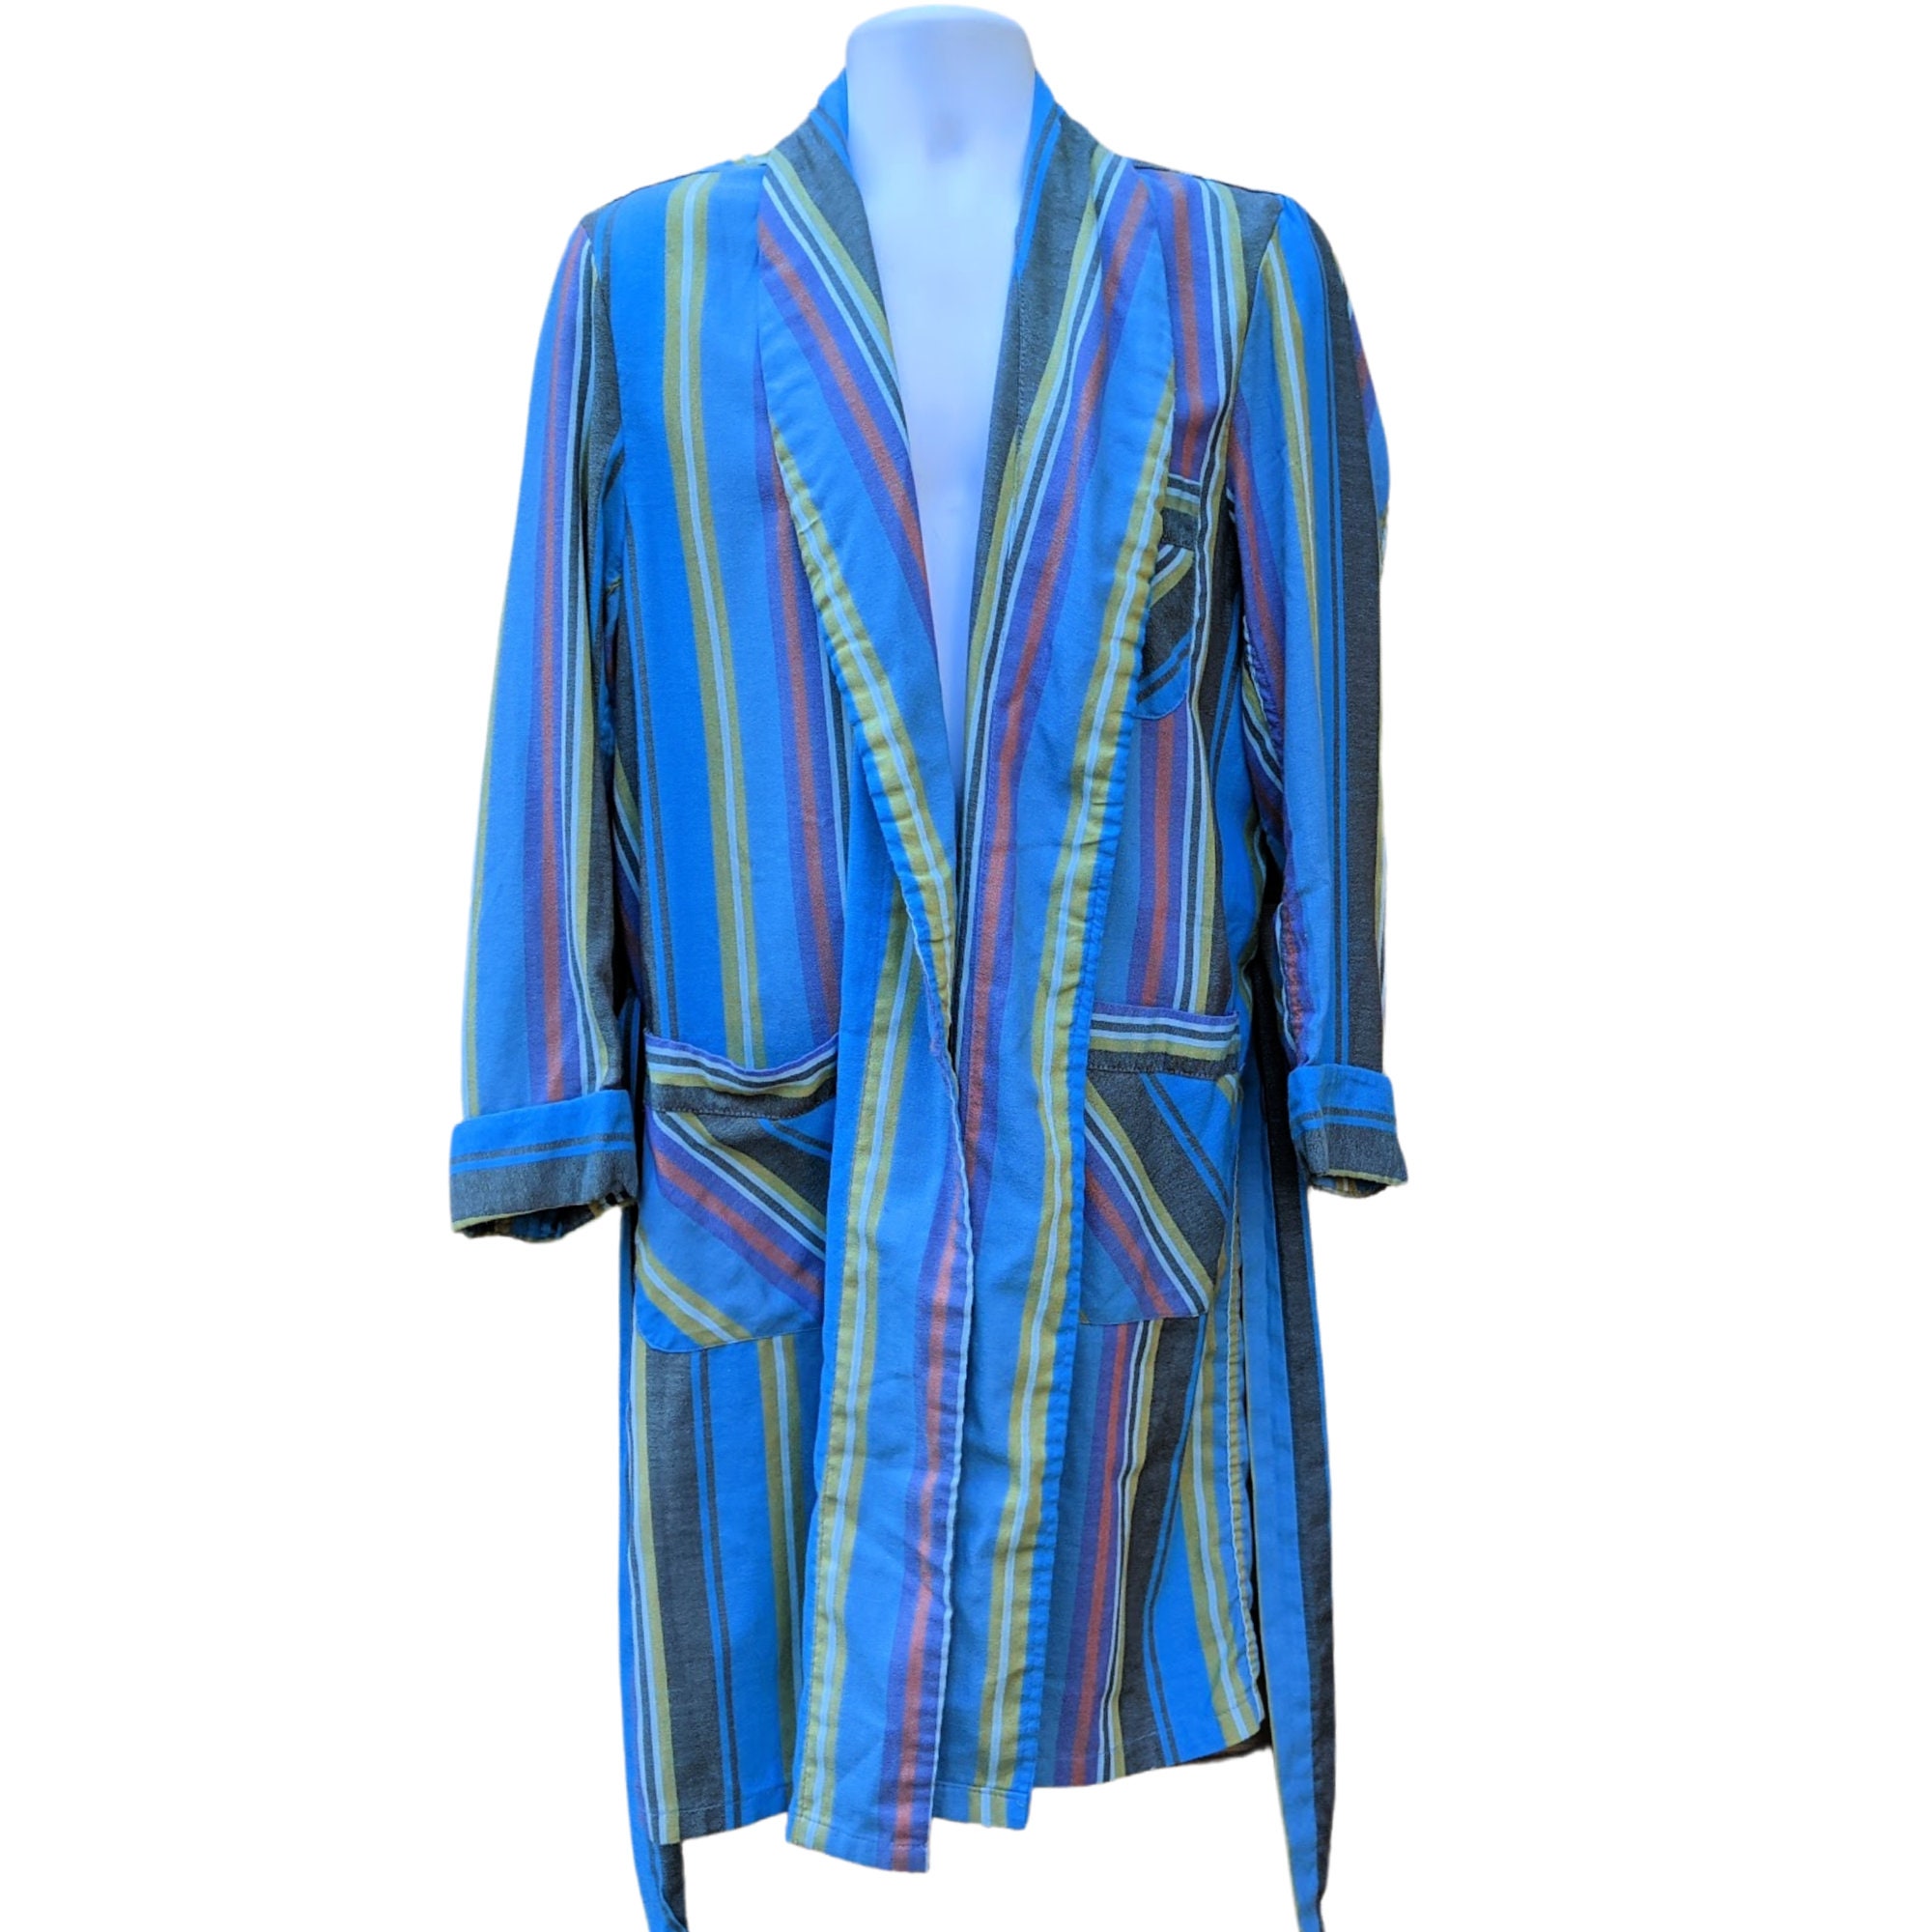 Vintage 50s or 60s Blue Striped Crepe Rayon Housecoat - Etsy UK